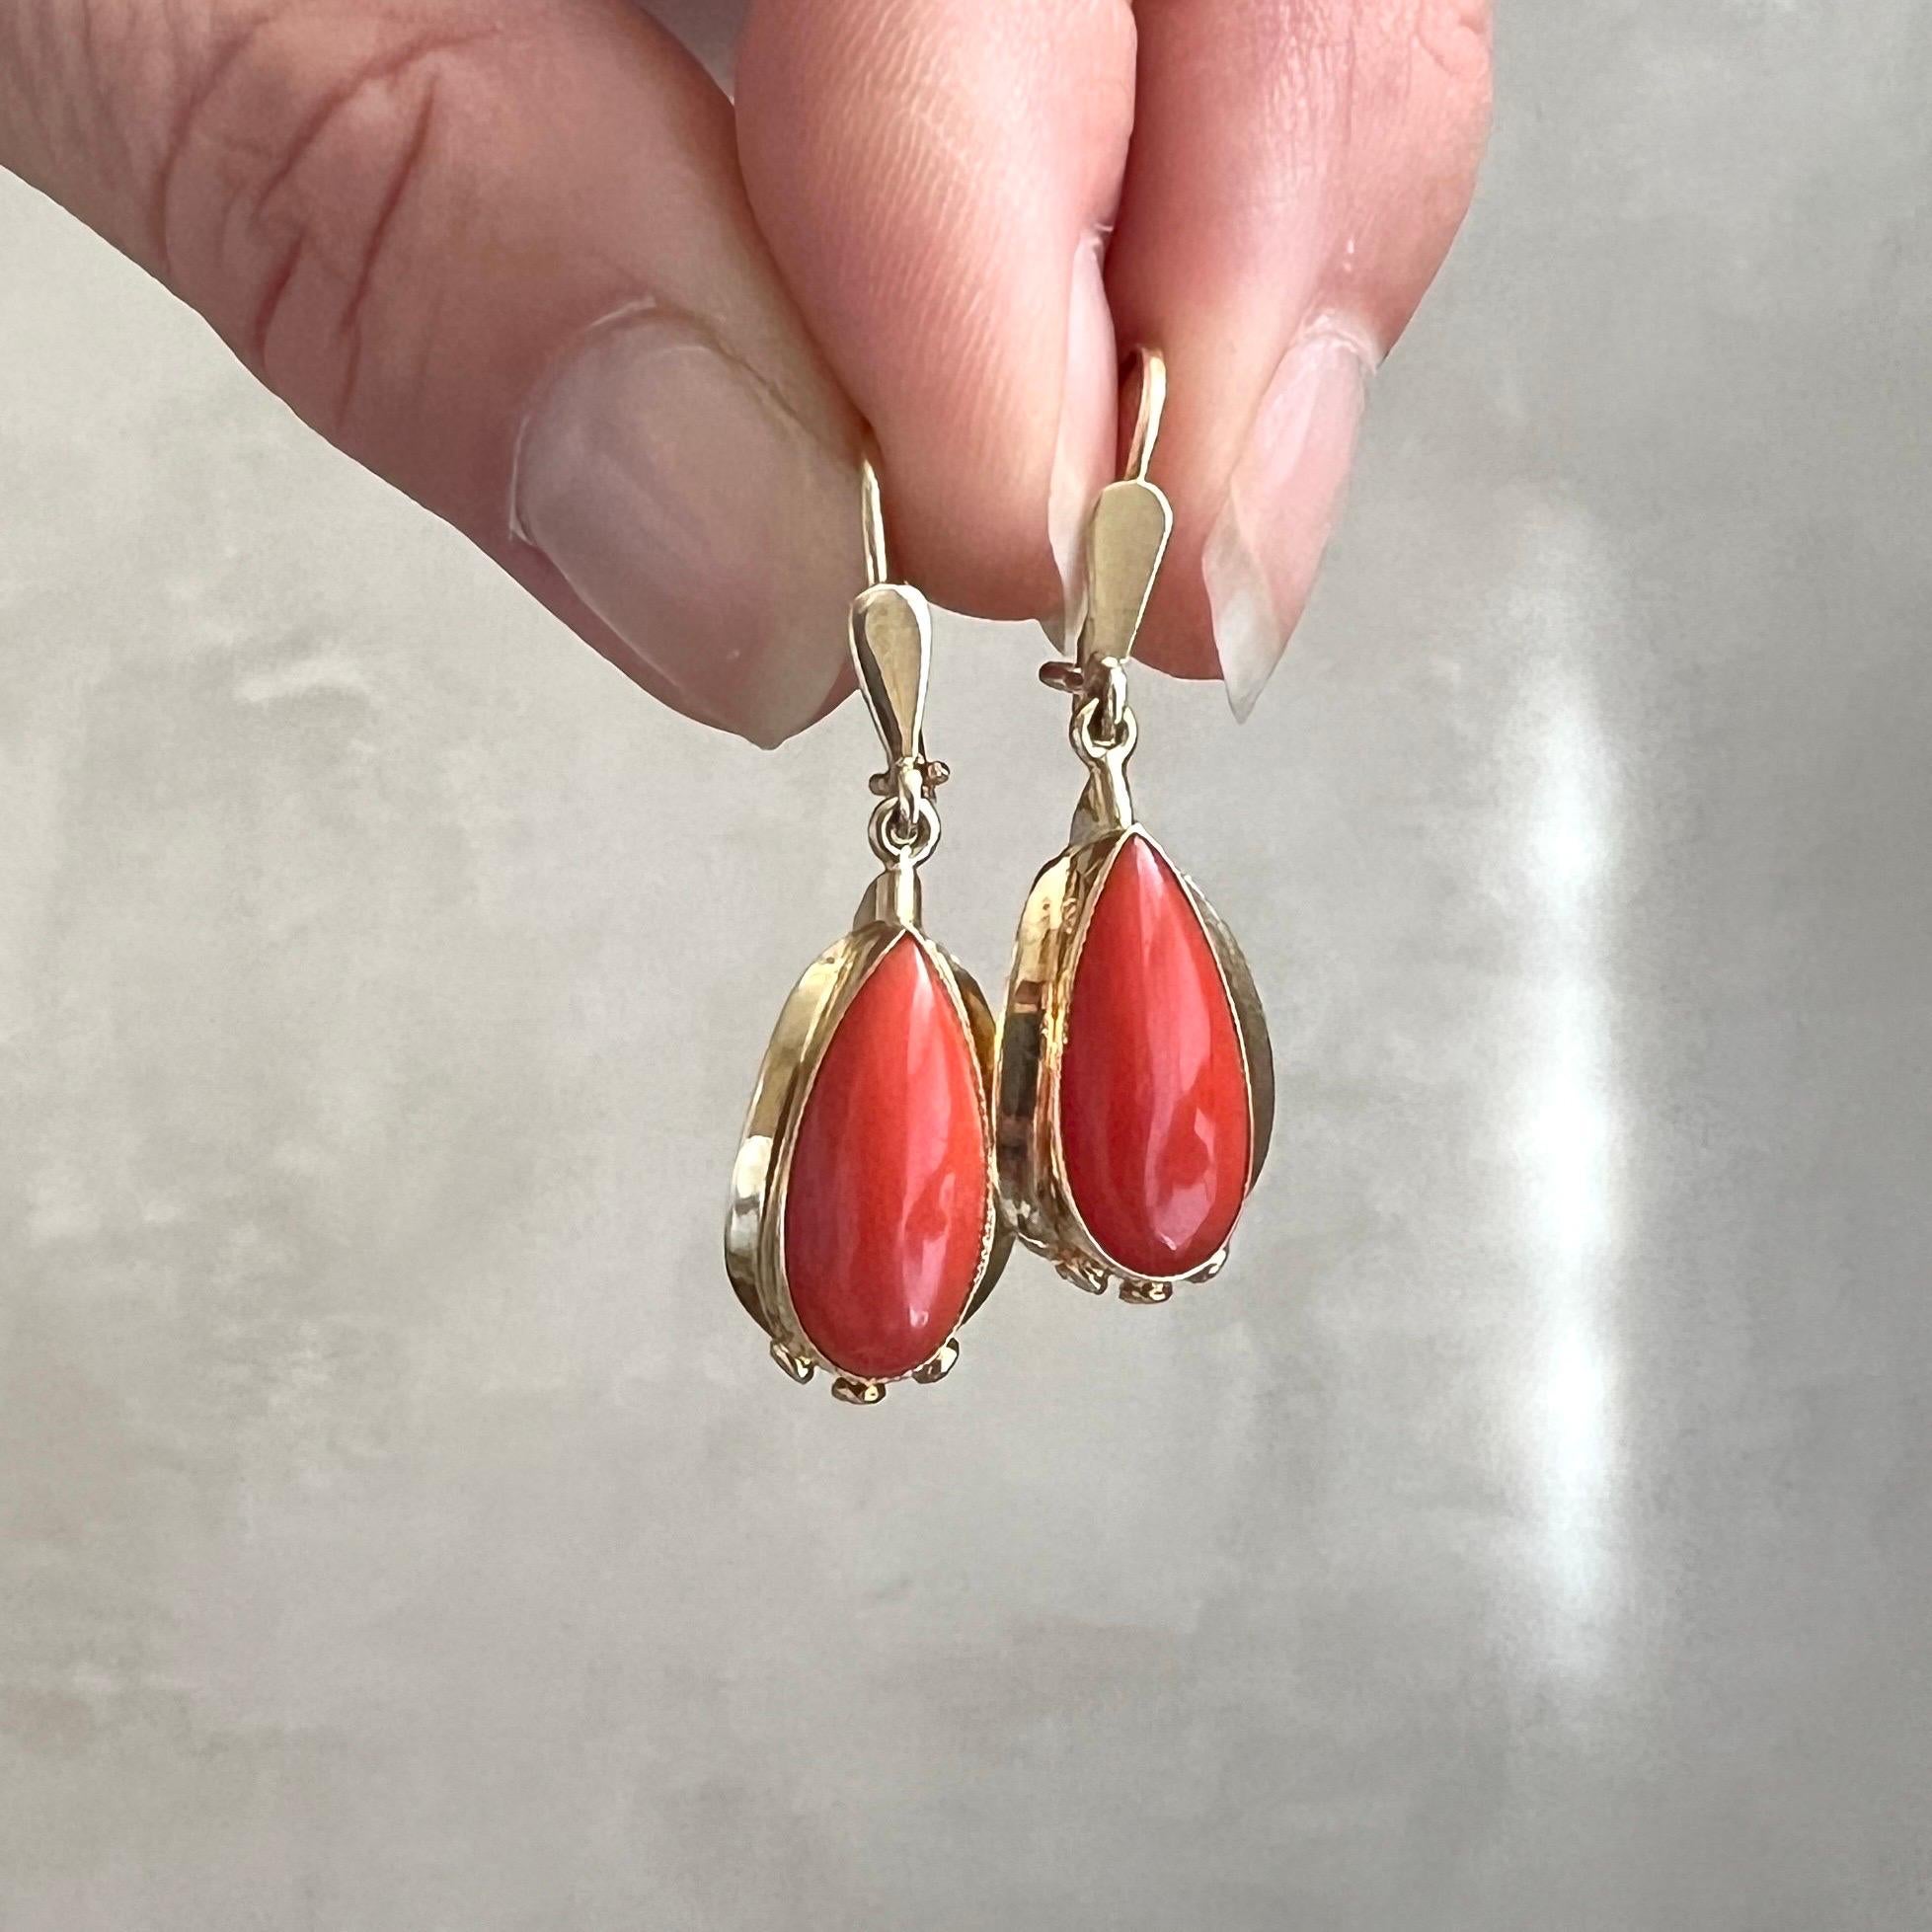 Art Deco 14 karat gold coral dangle earrings. These earrings are oval-shaped and have a smooth cabochon cut red coral mounted in 14 karat yellow gold bezel setting. At the bottom of the earrings there are three symmetrical open figures, which looks